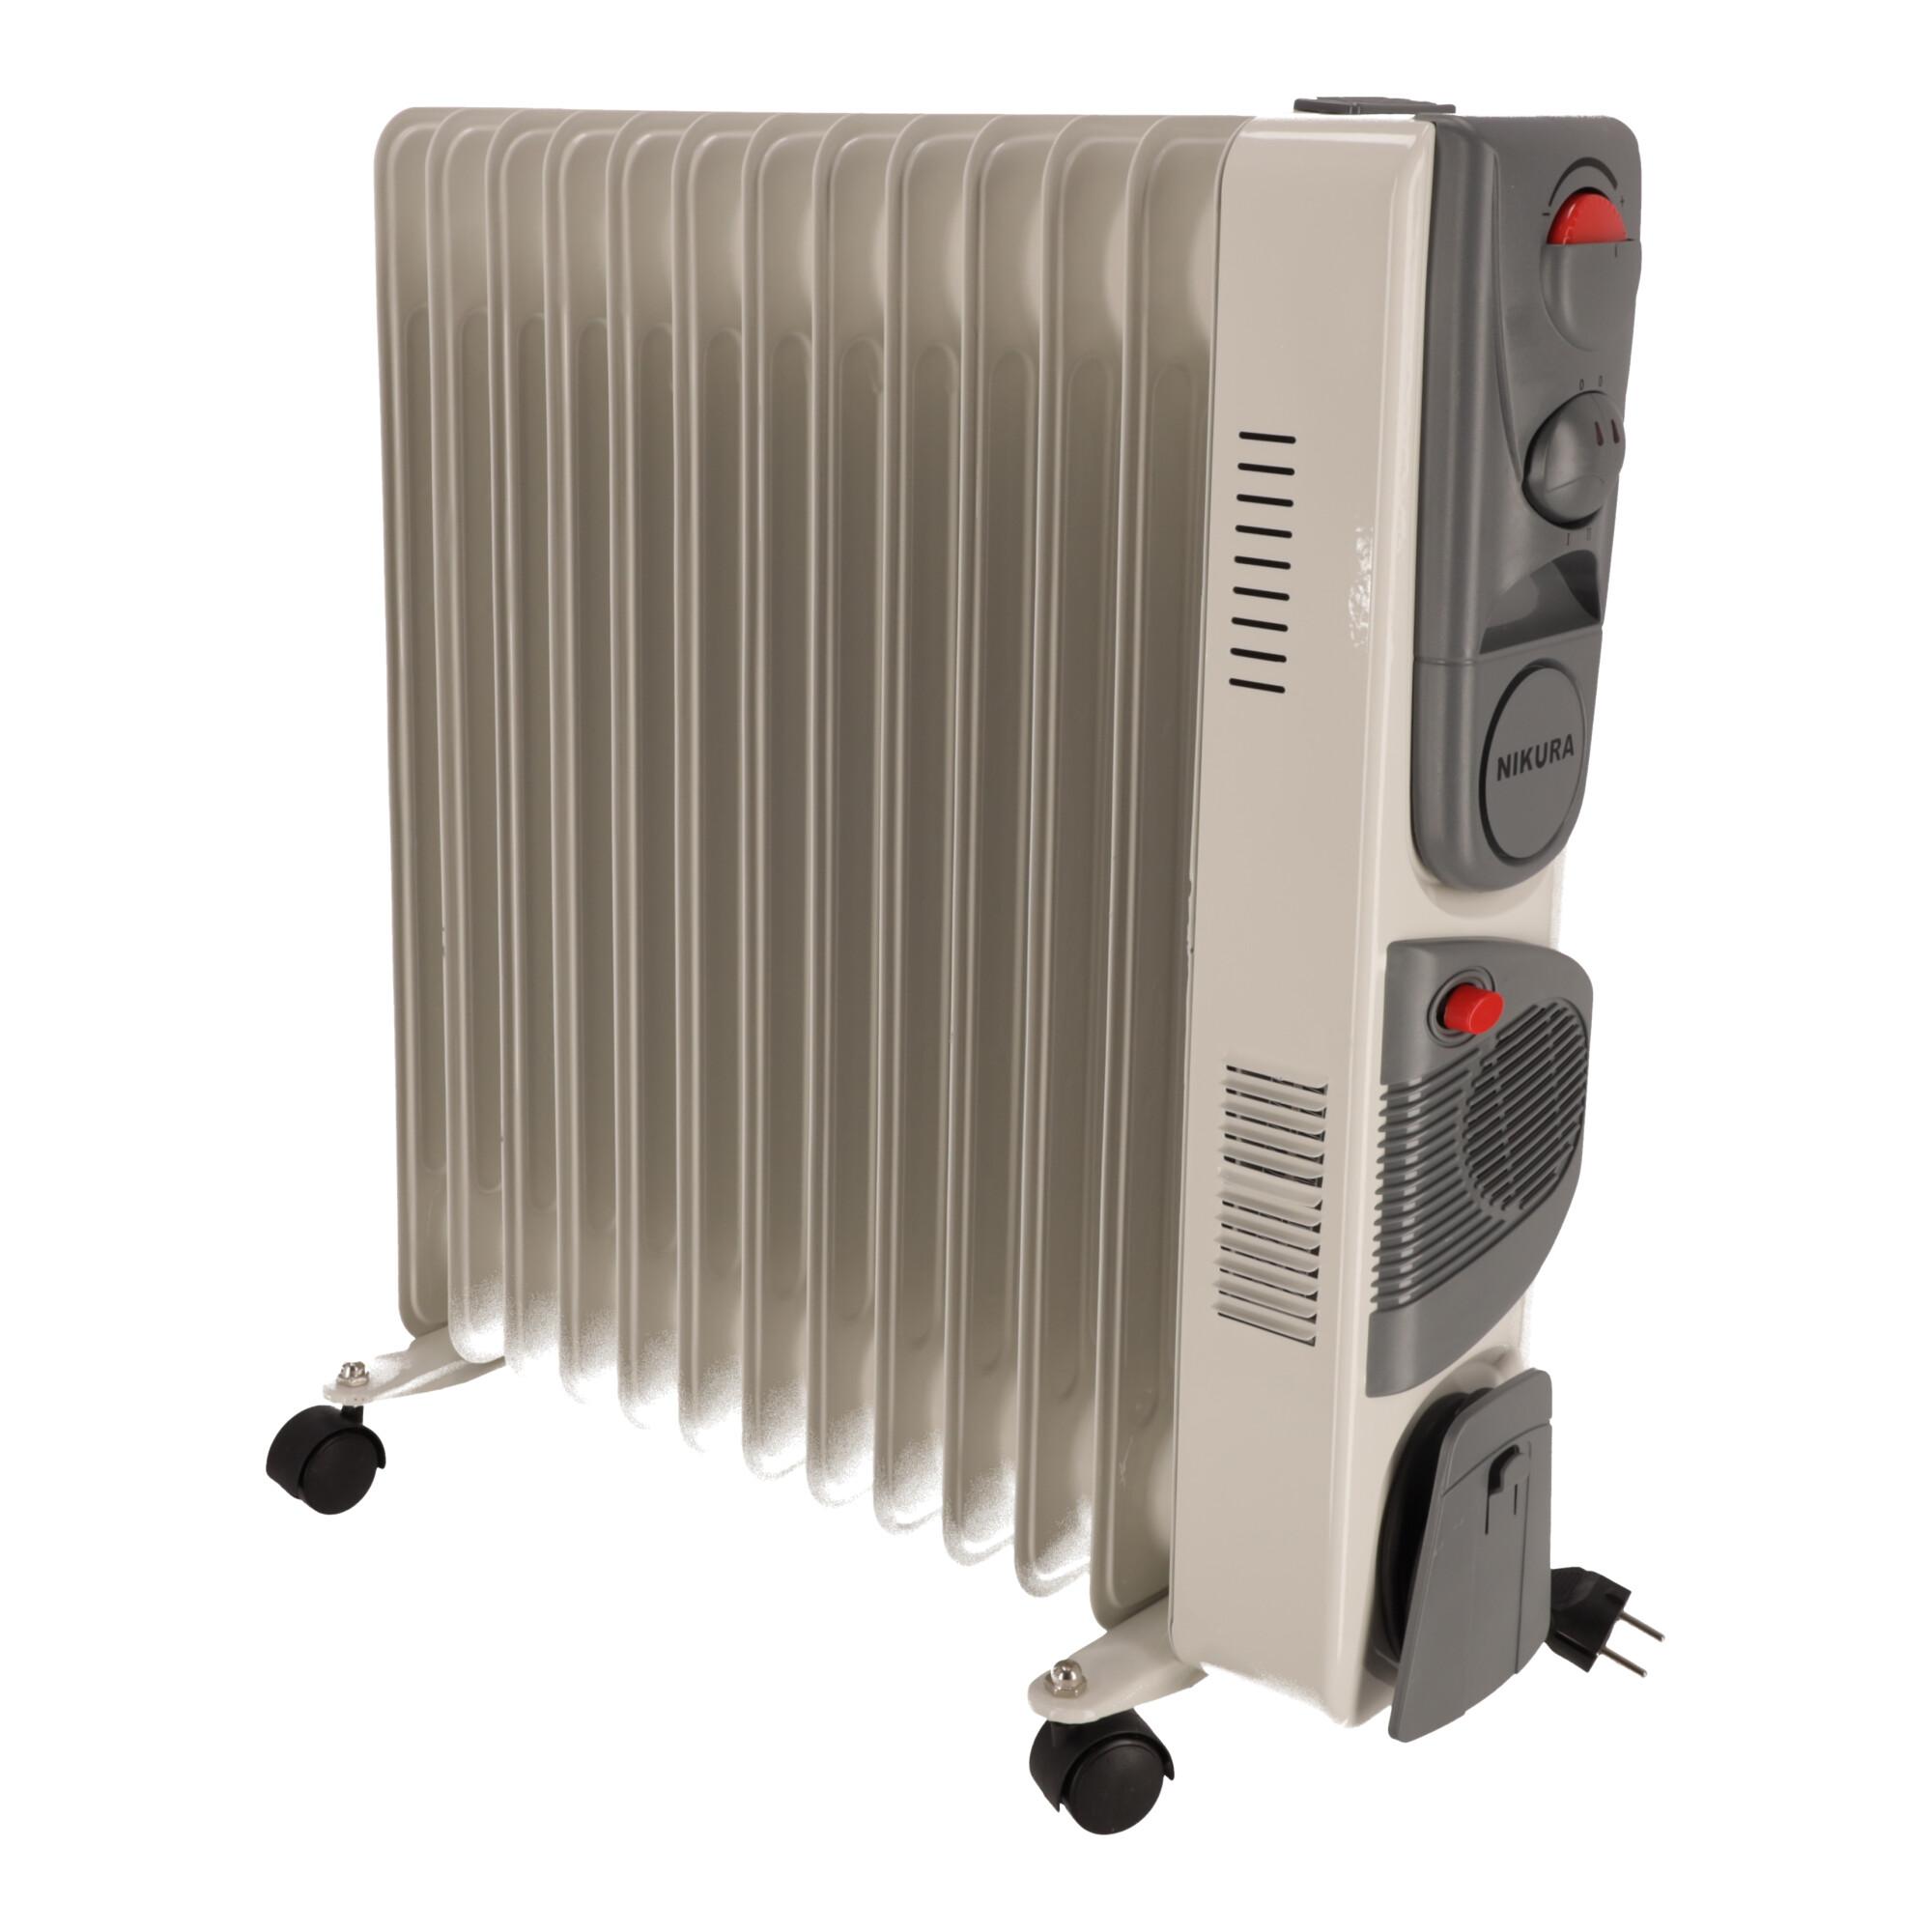 Oil fired electric heater 13 ribs